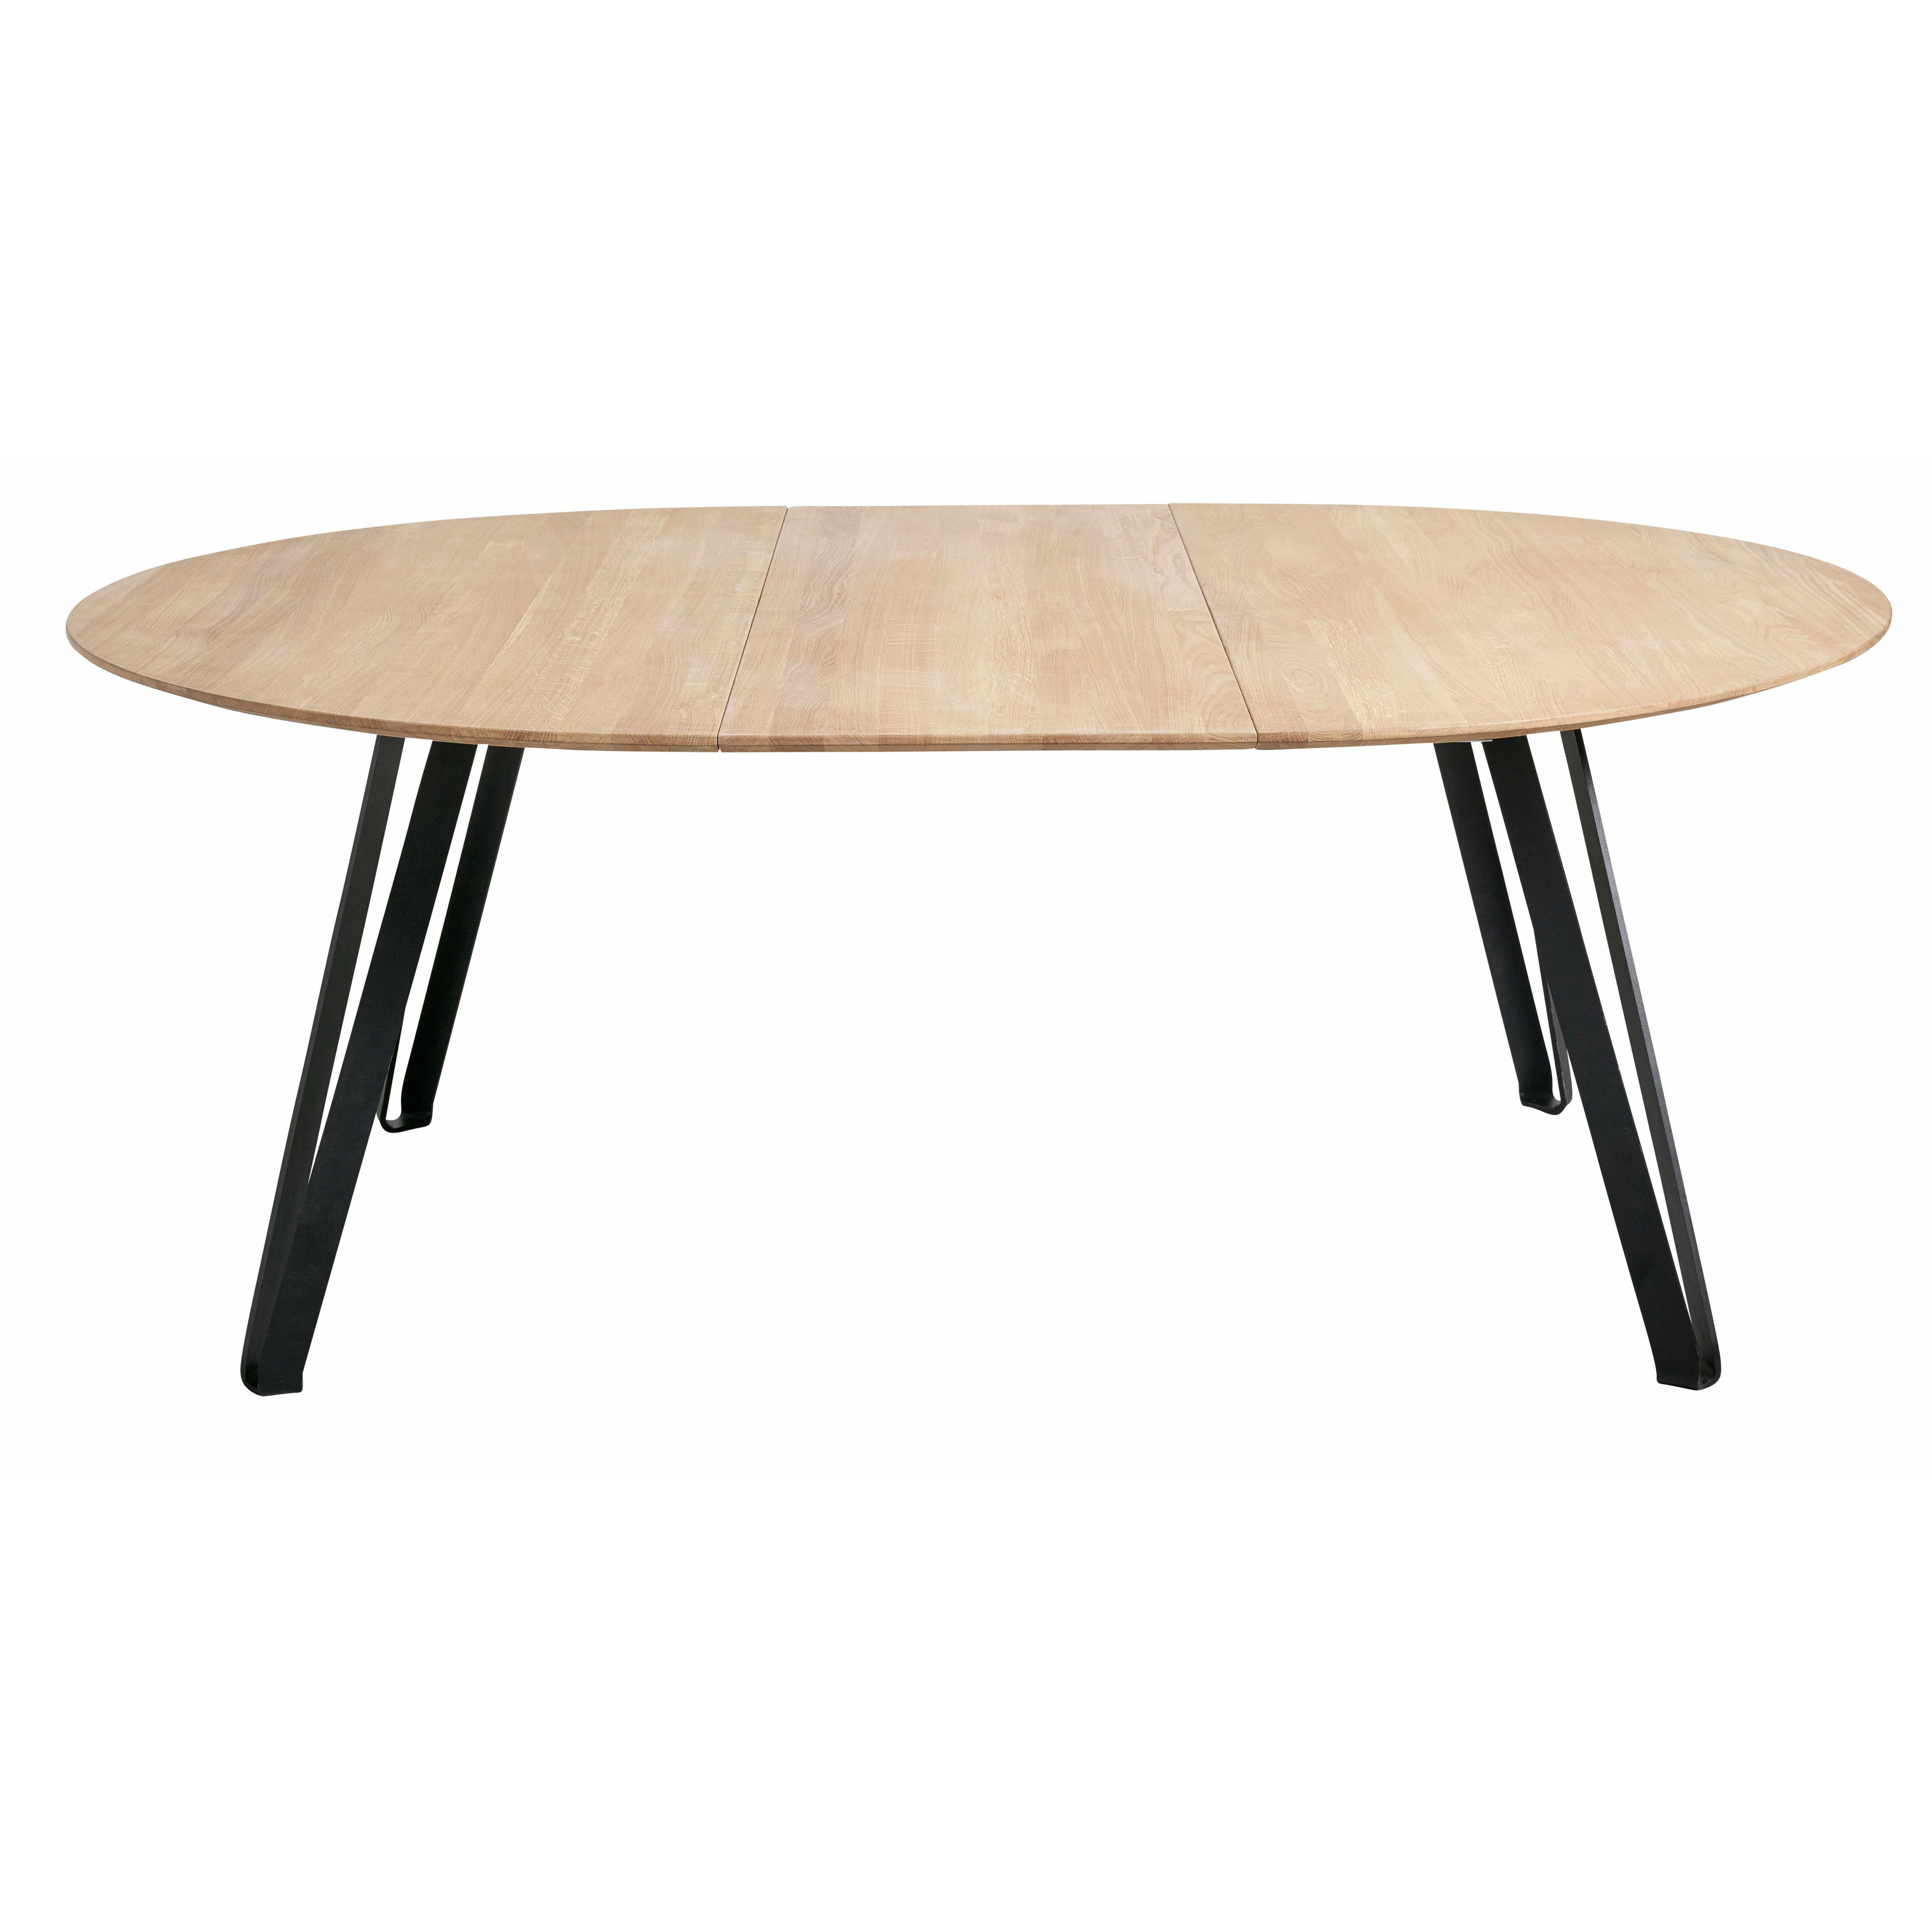 Muubs Space Eetting Table Round Oak, 150 cm